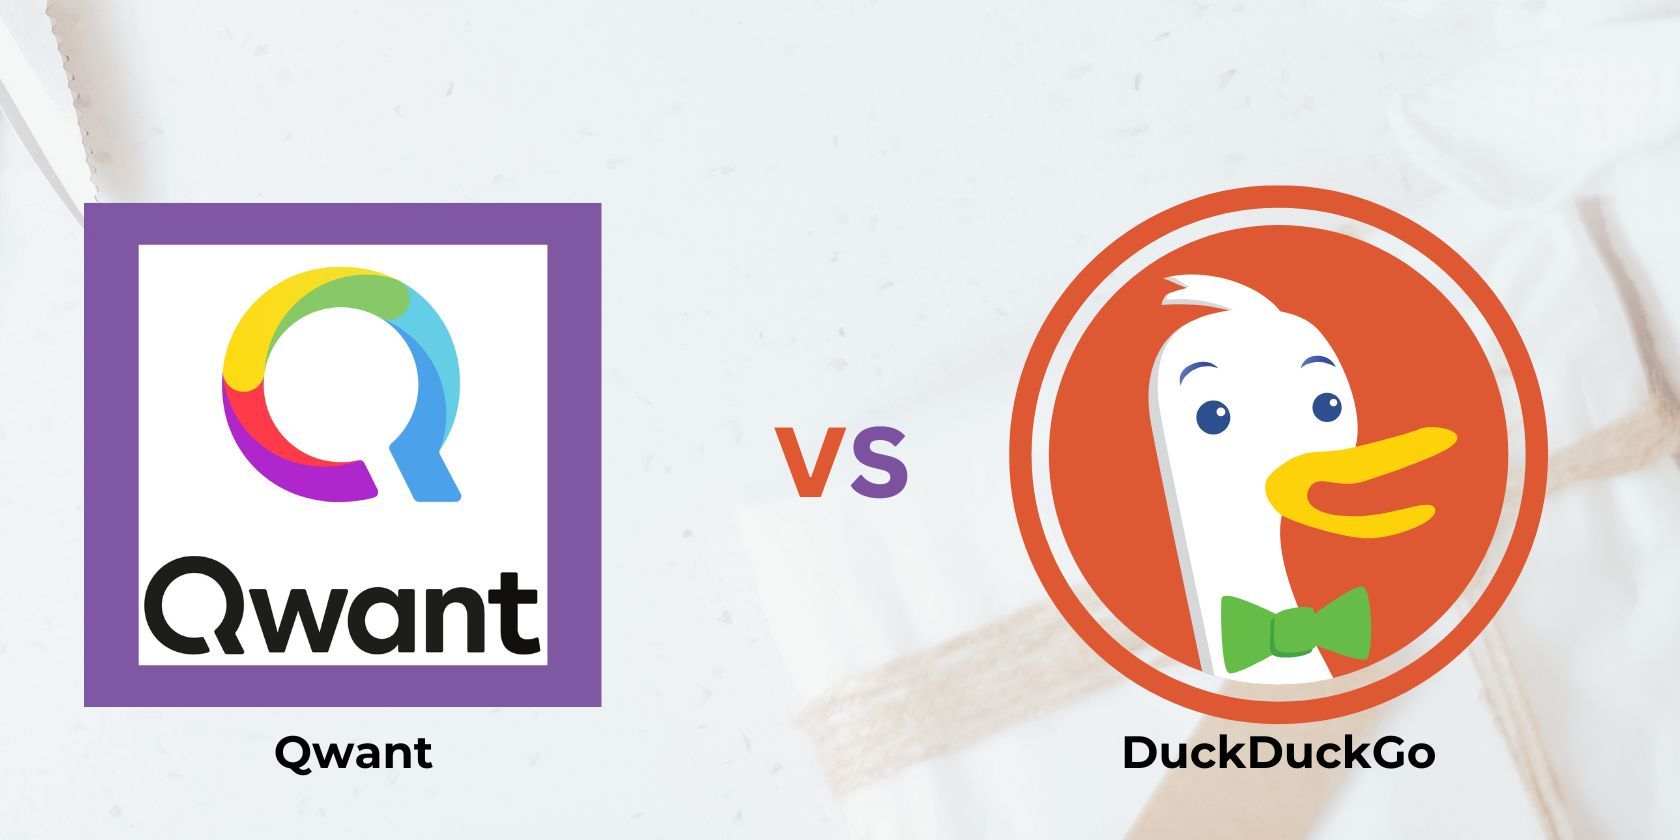 Qwant vs. DuckDuckGo: Which Search Engine Is More Private?